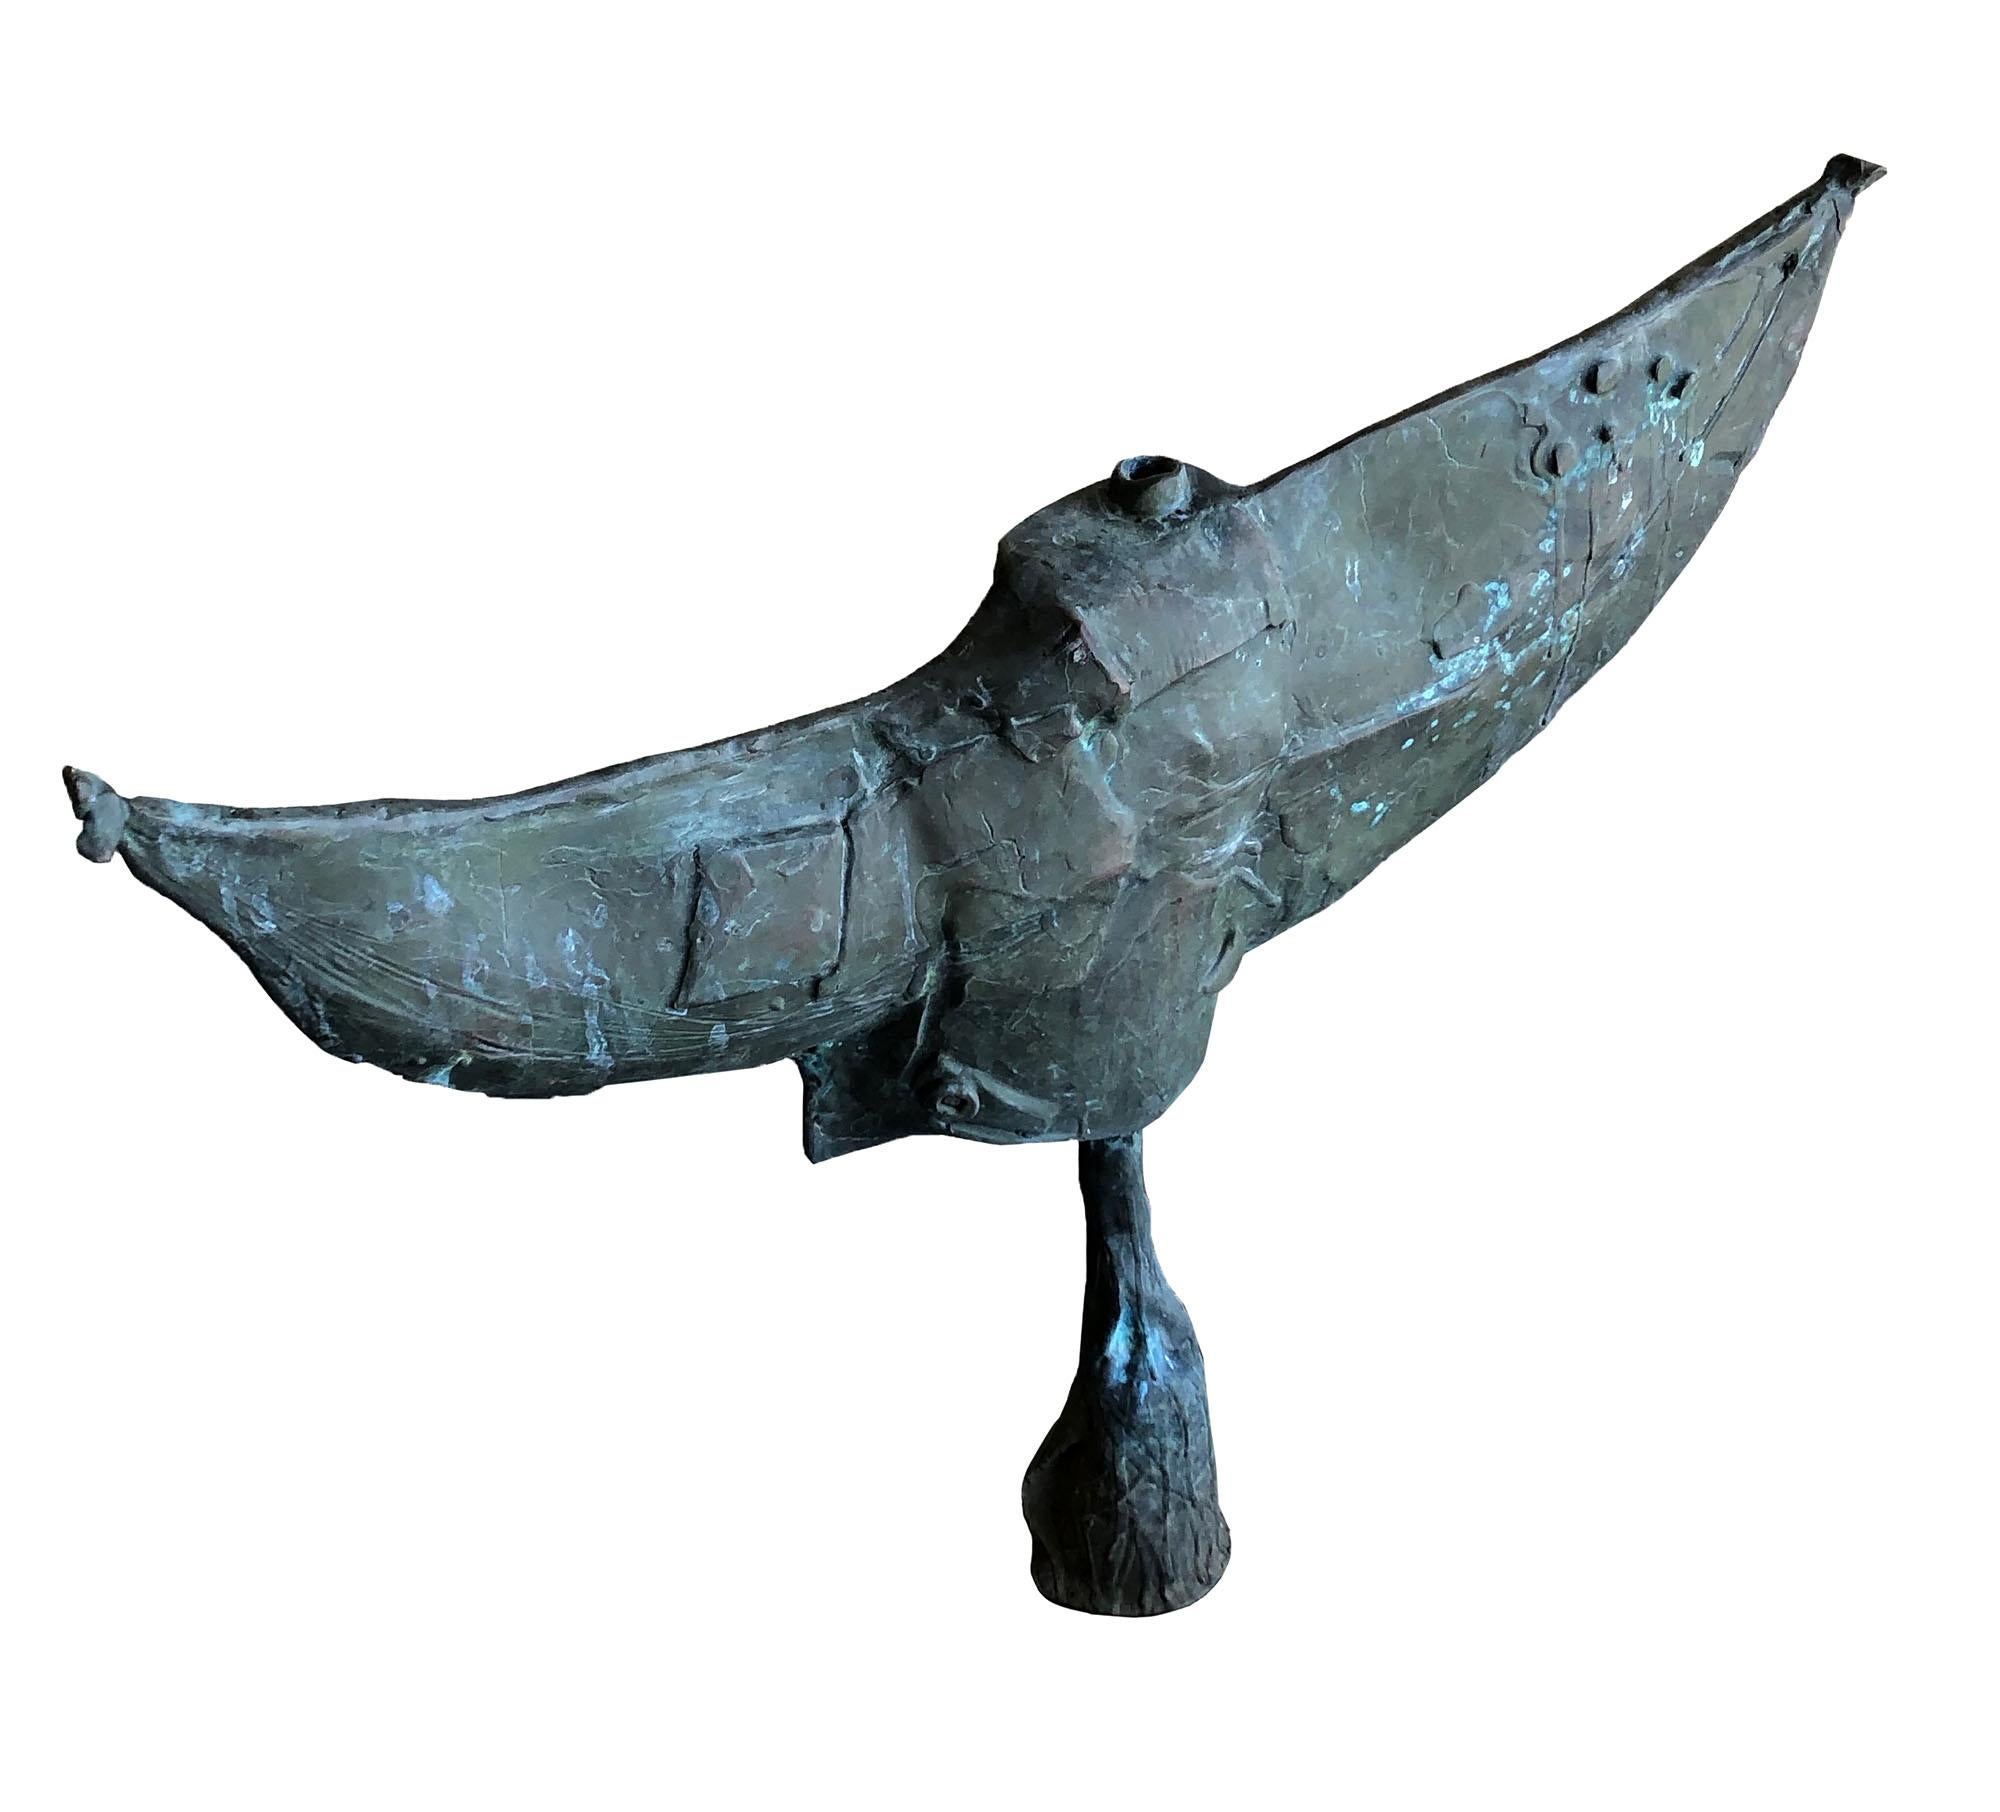 Large abstract modernist bronze garden sculpture in sickle form created by Conway 